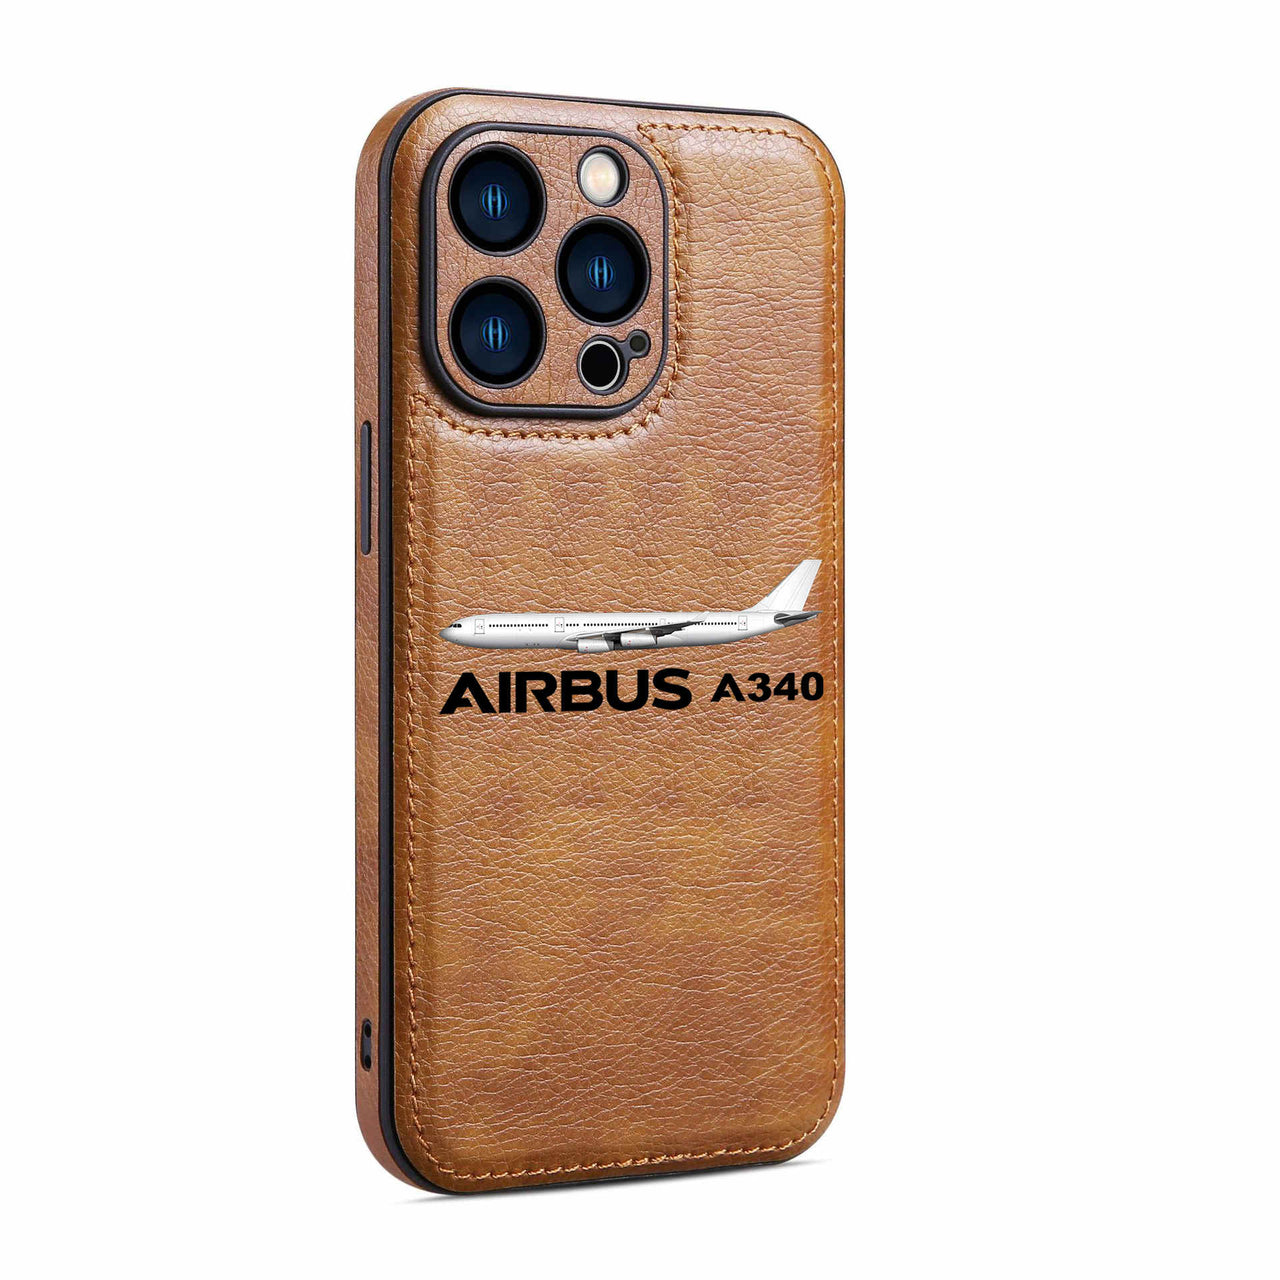 The Airbus A340 Designed Leather iPhone Cases